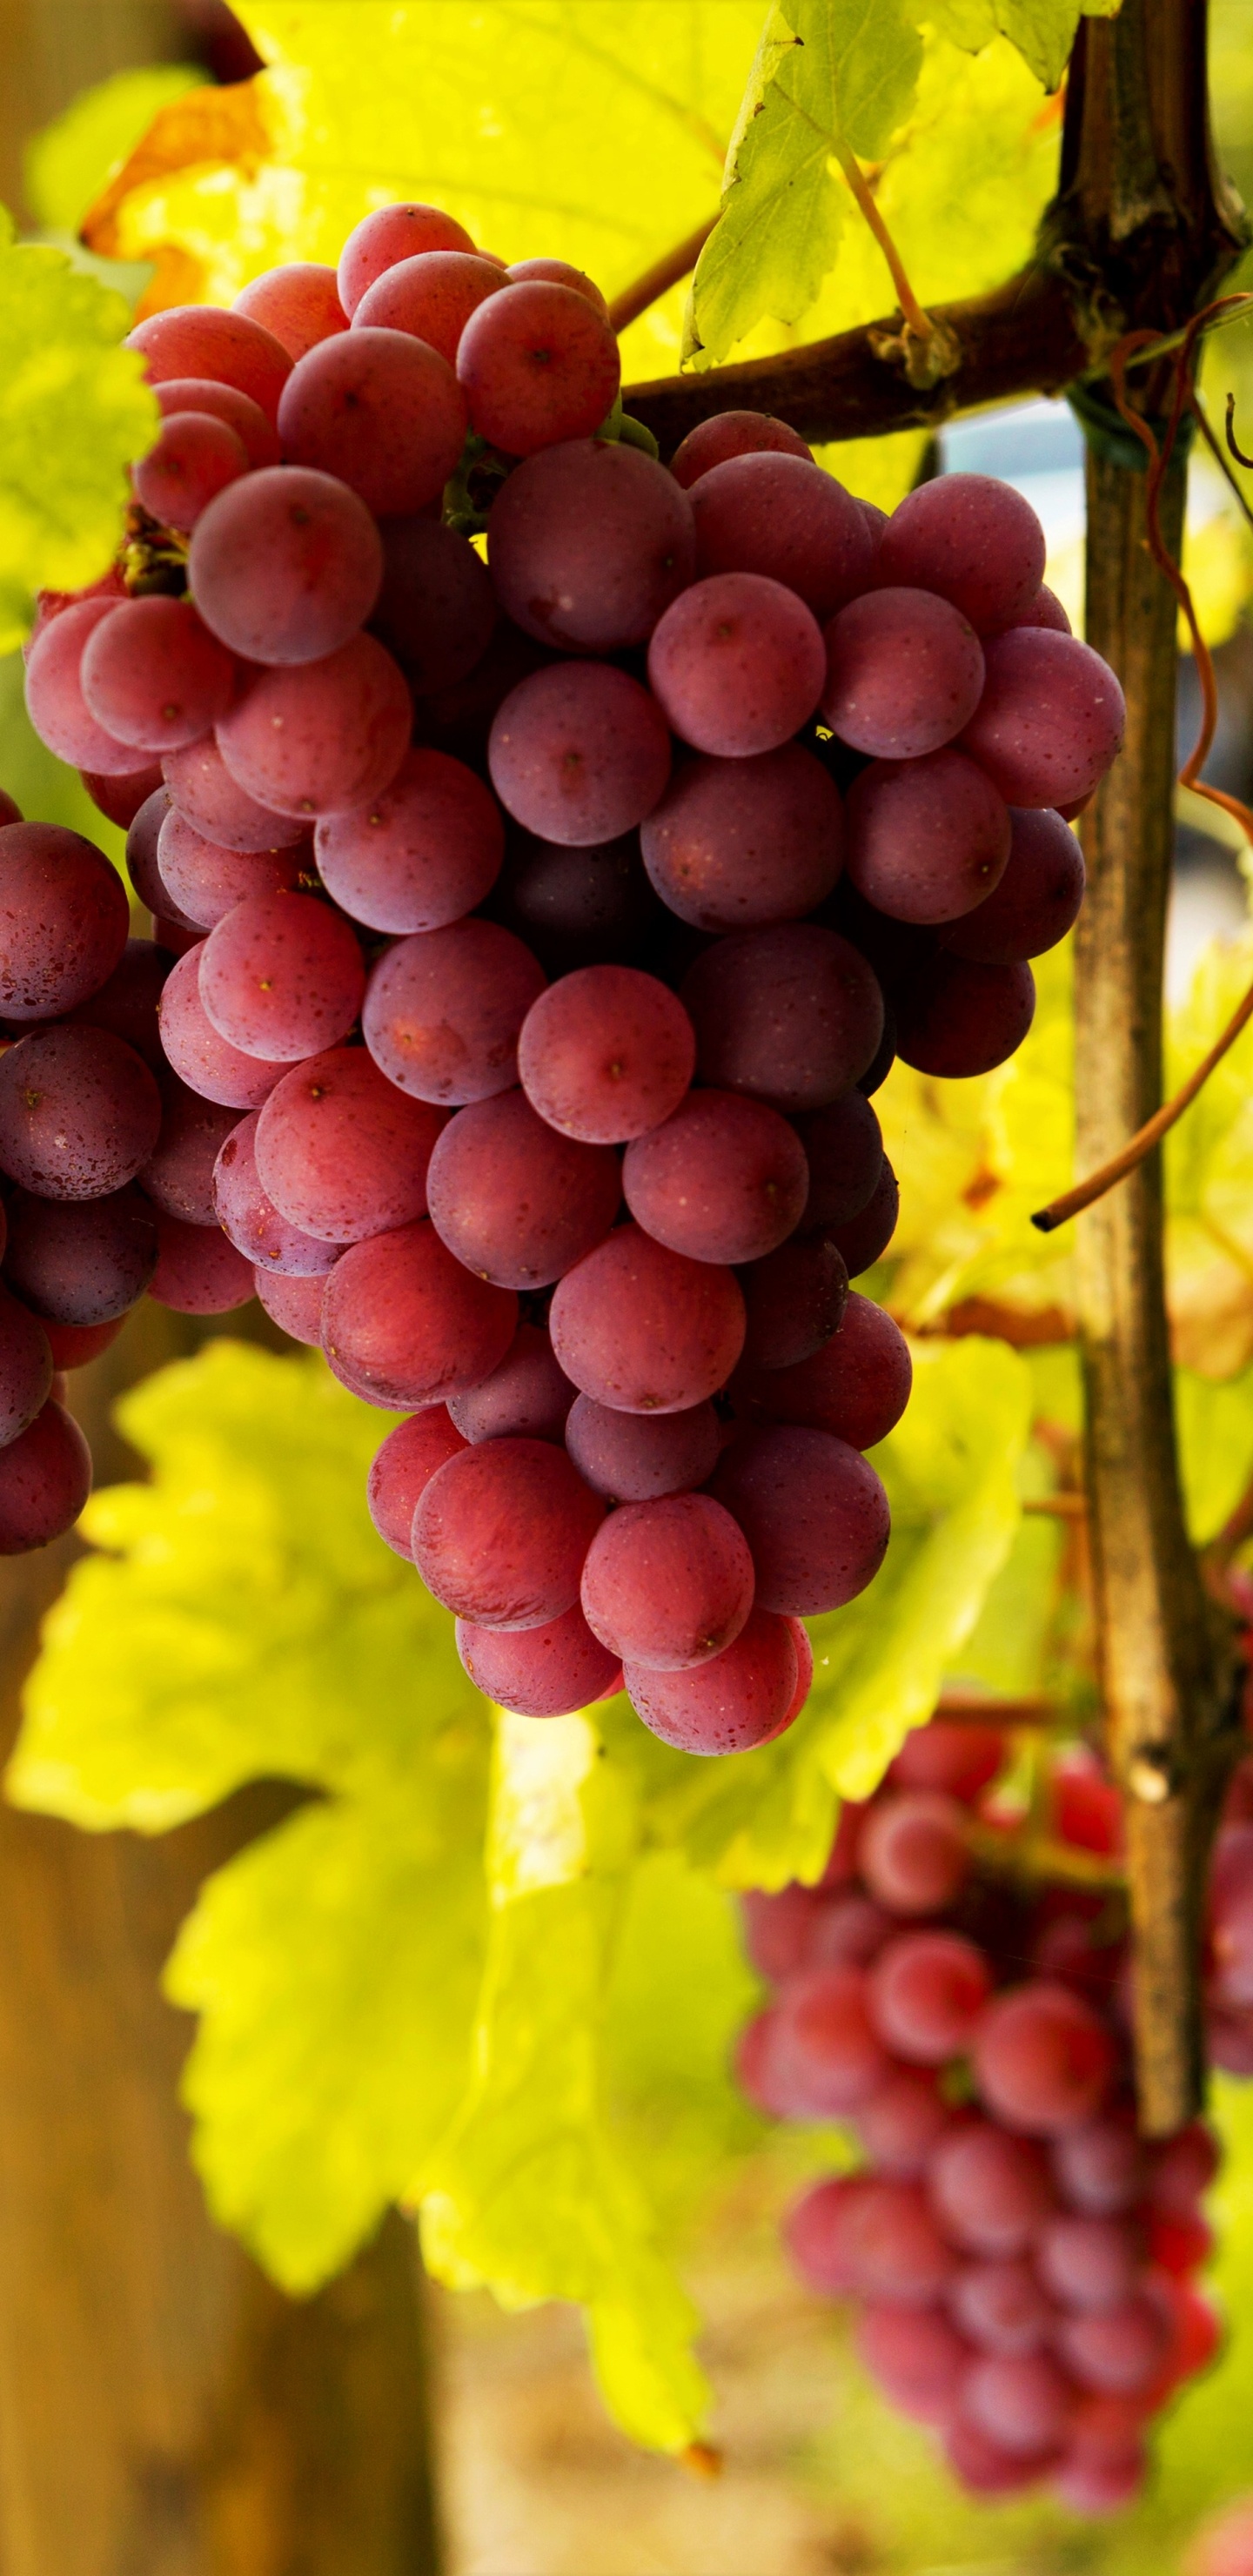 Grapes: A genus of about 60 to 80 species of vining plants in the family Vitaceae. 1440x2960 HD Wallpaper.